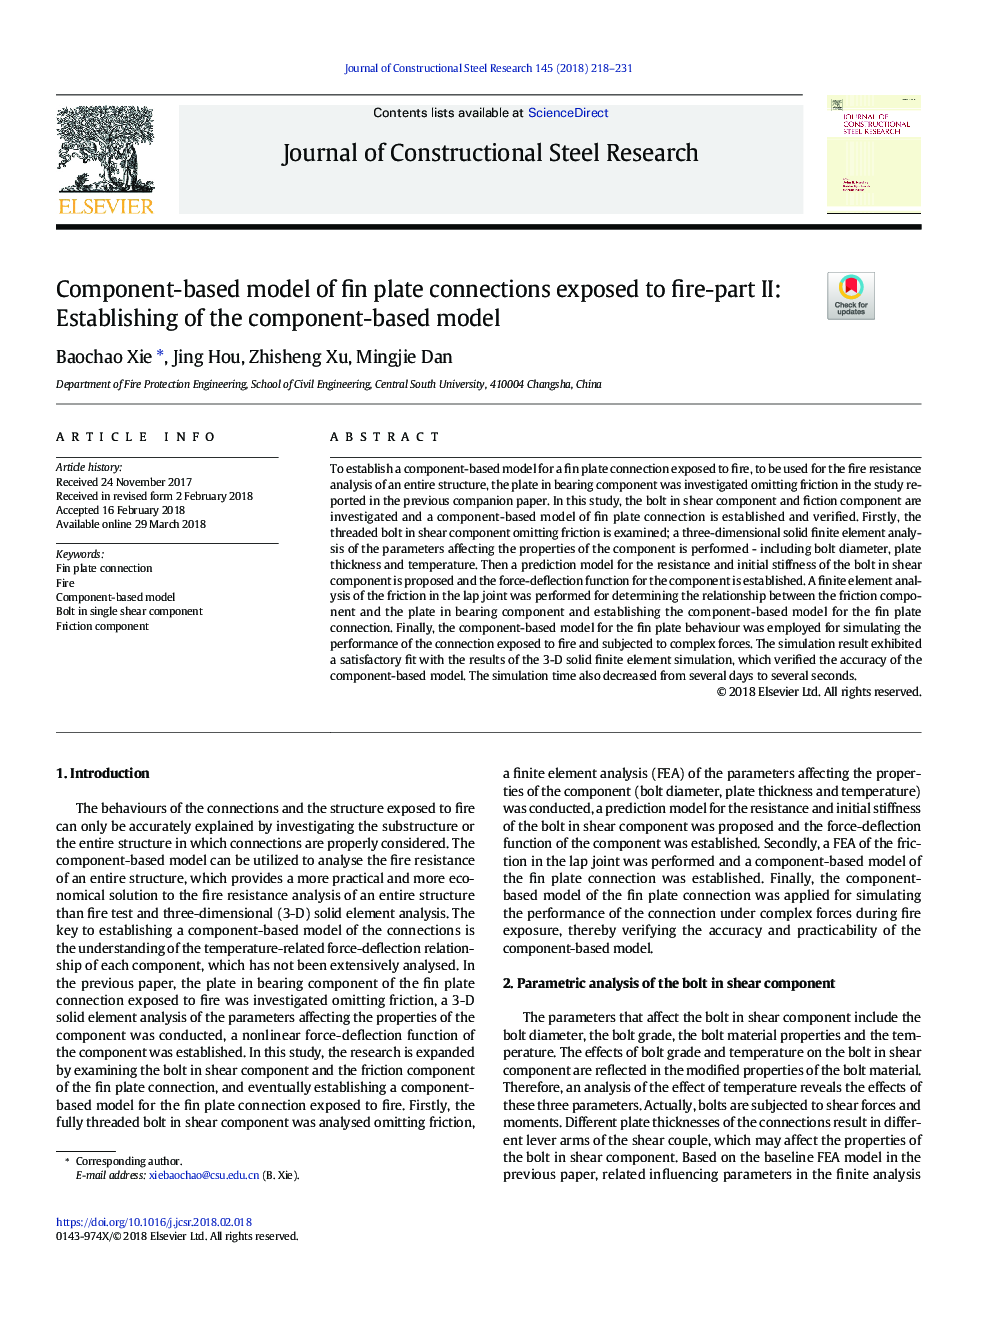 Component-based model of fin plate connections exposed to fire-part II: Establishing of the component-based model